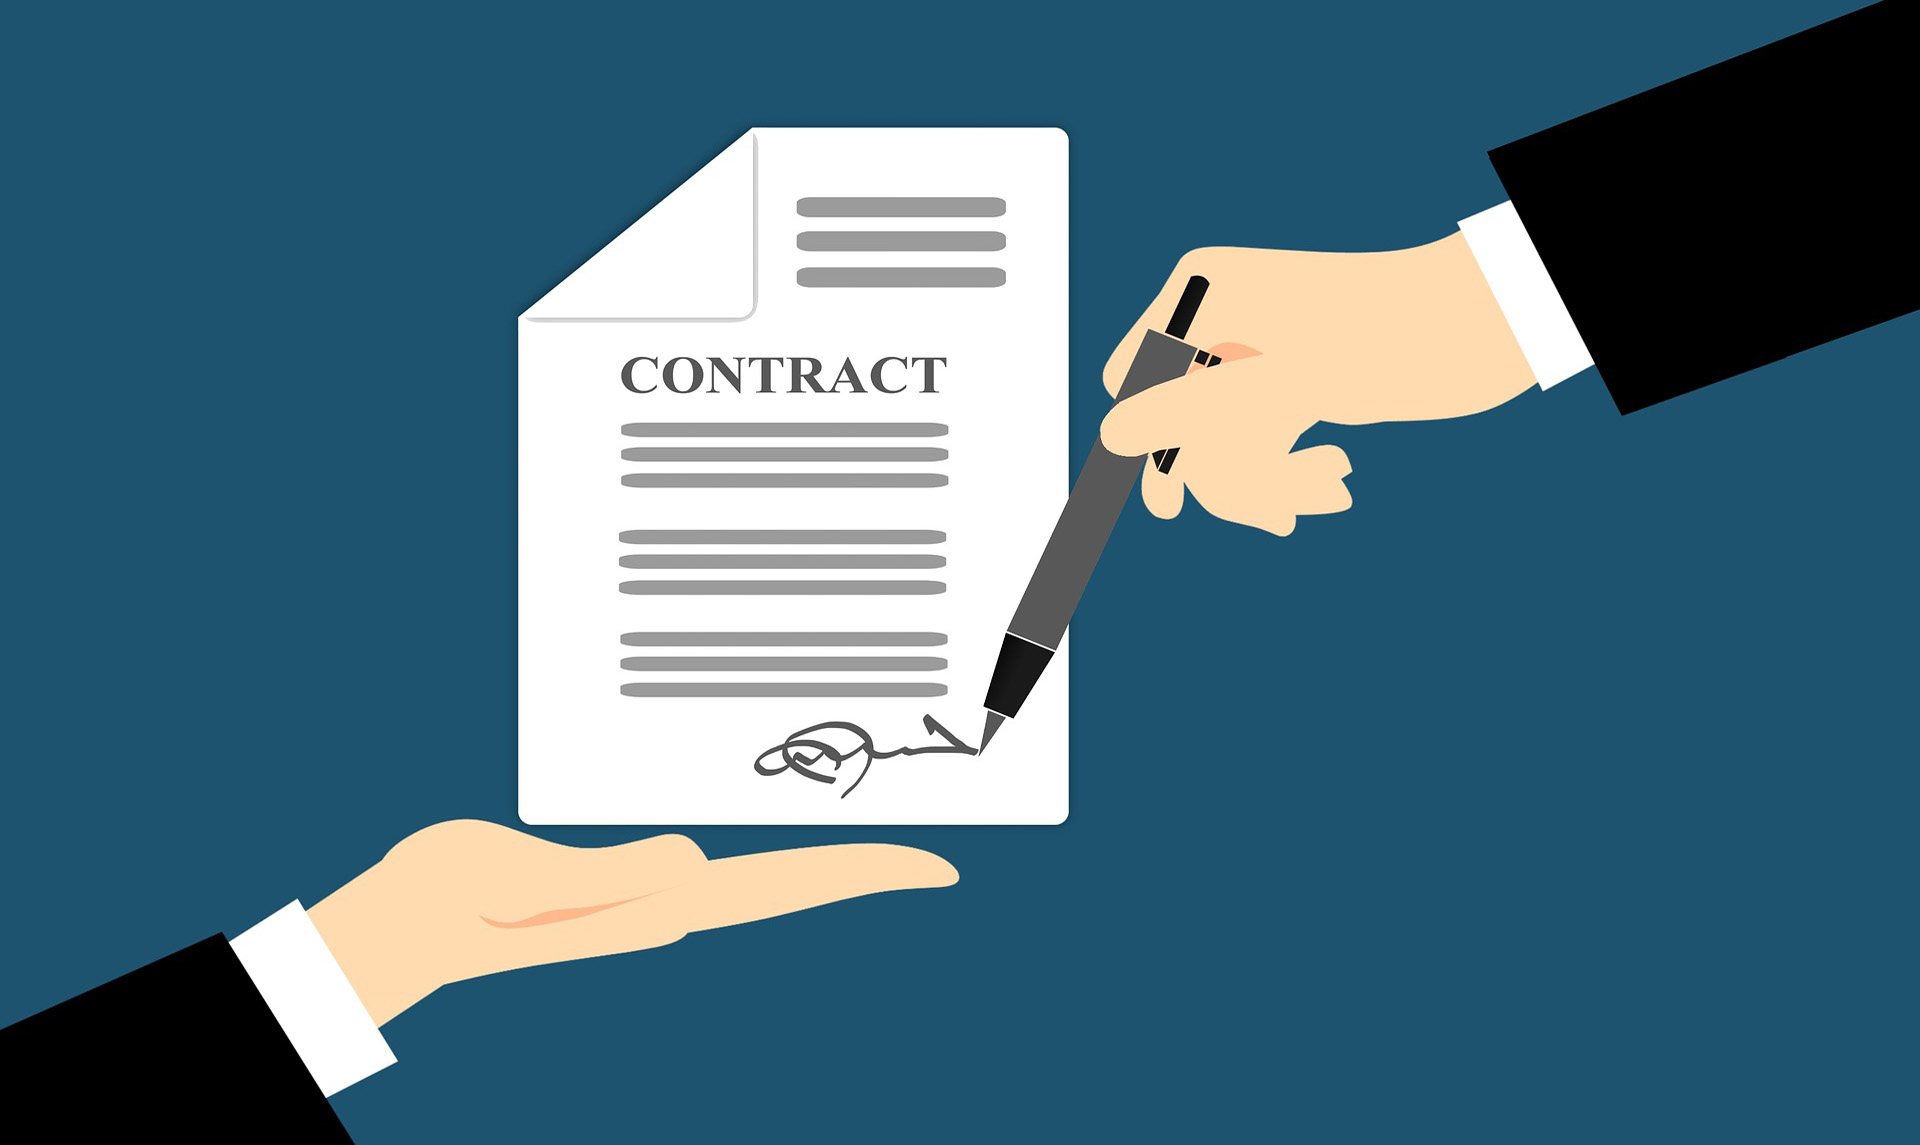 10 compulsory contents of an employment contract in Vietnam